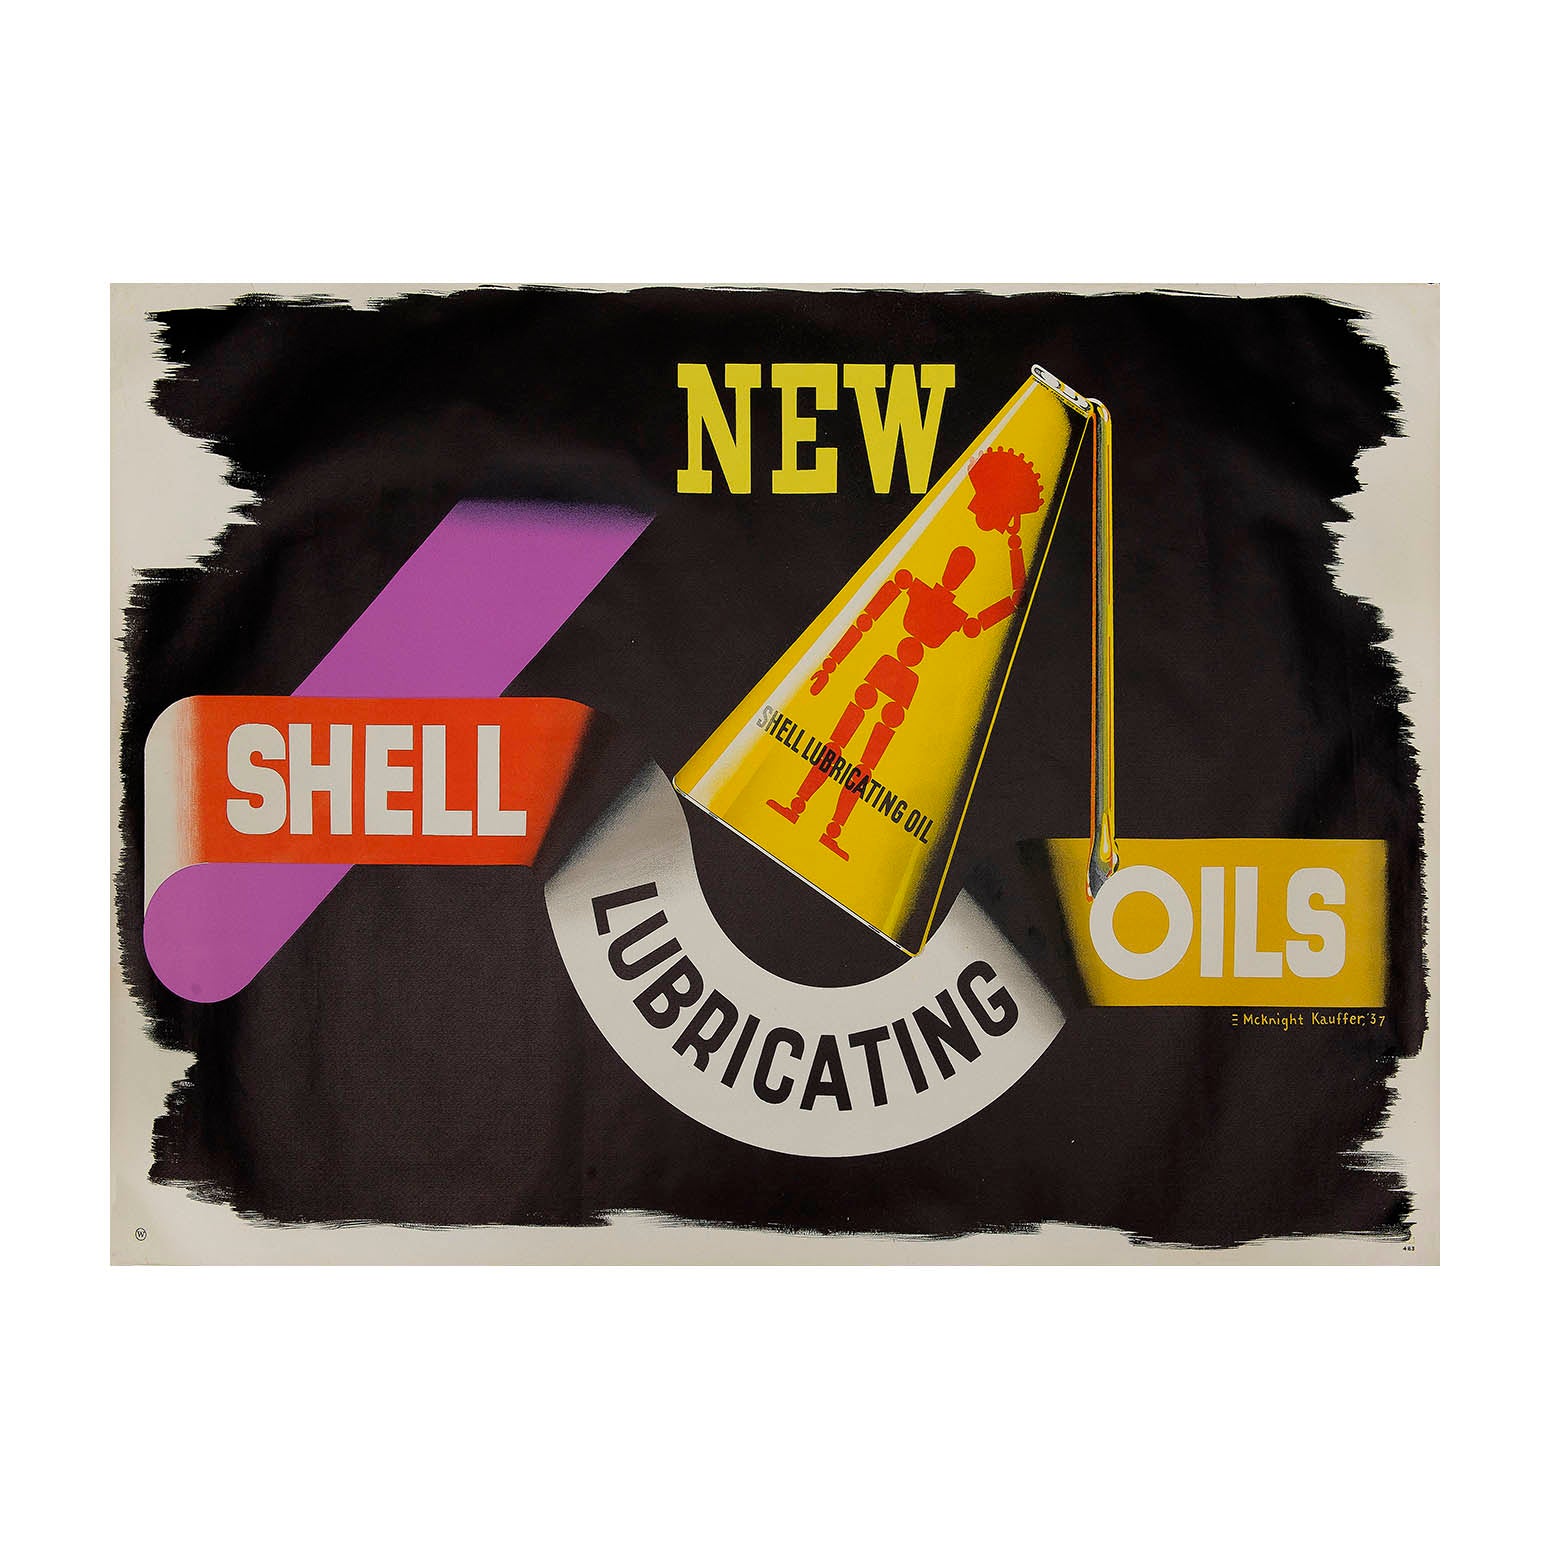 Original Shell poster: New Shell Lubricating Oils, by Edward McKnight Kauffer, 1937. Undulating ribbon motif connects the message with the product. Modernist design